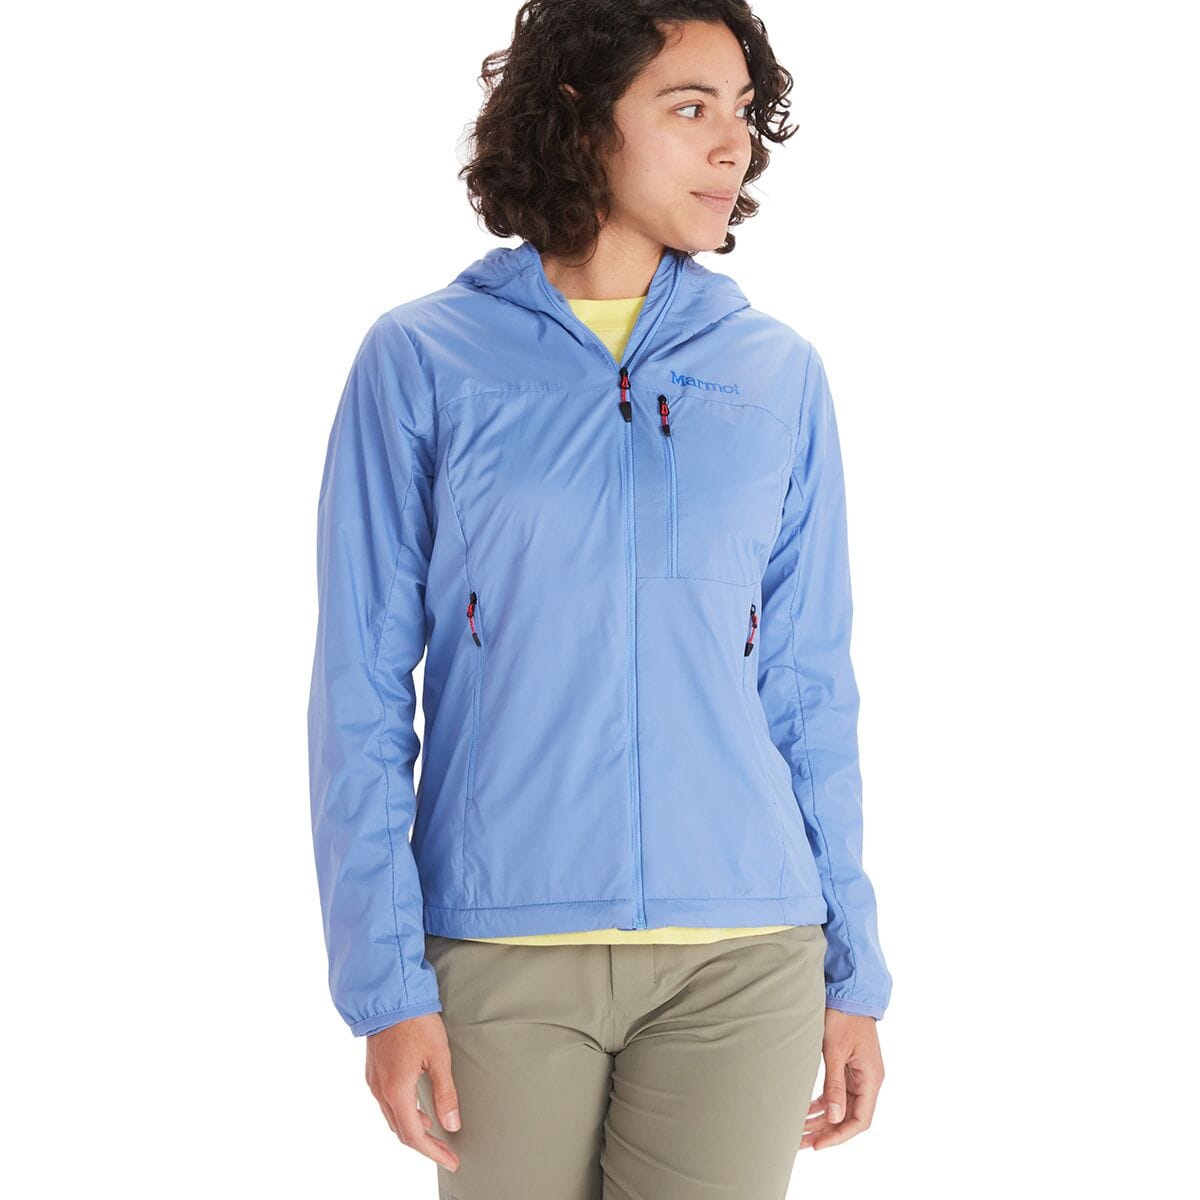 Marmot Ether DriClime Hooded Jacket - Women's